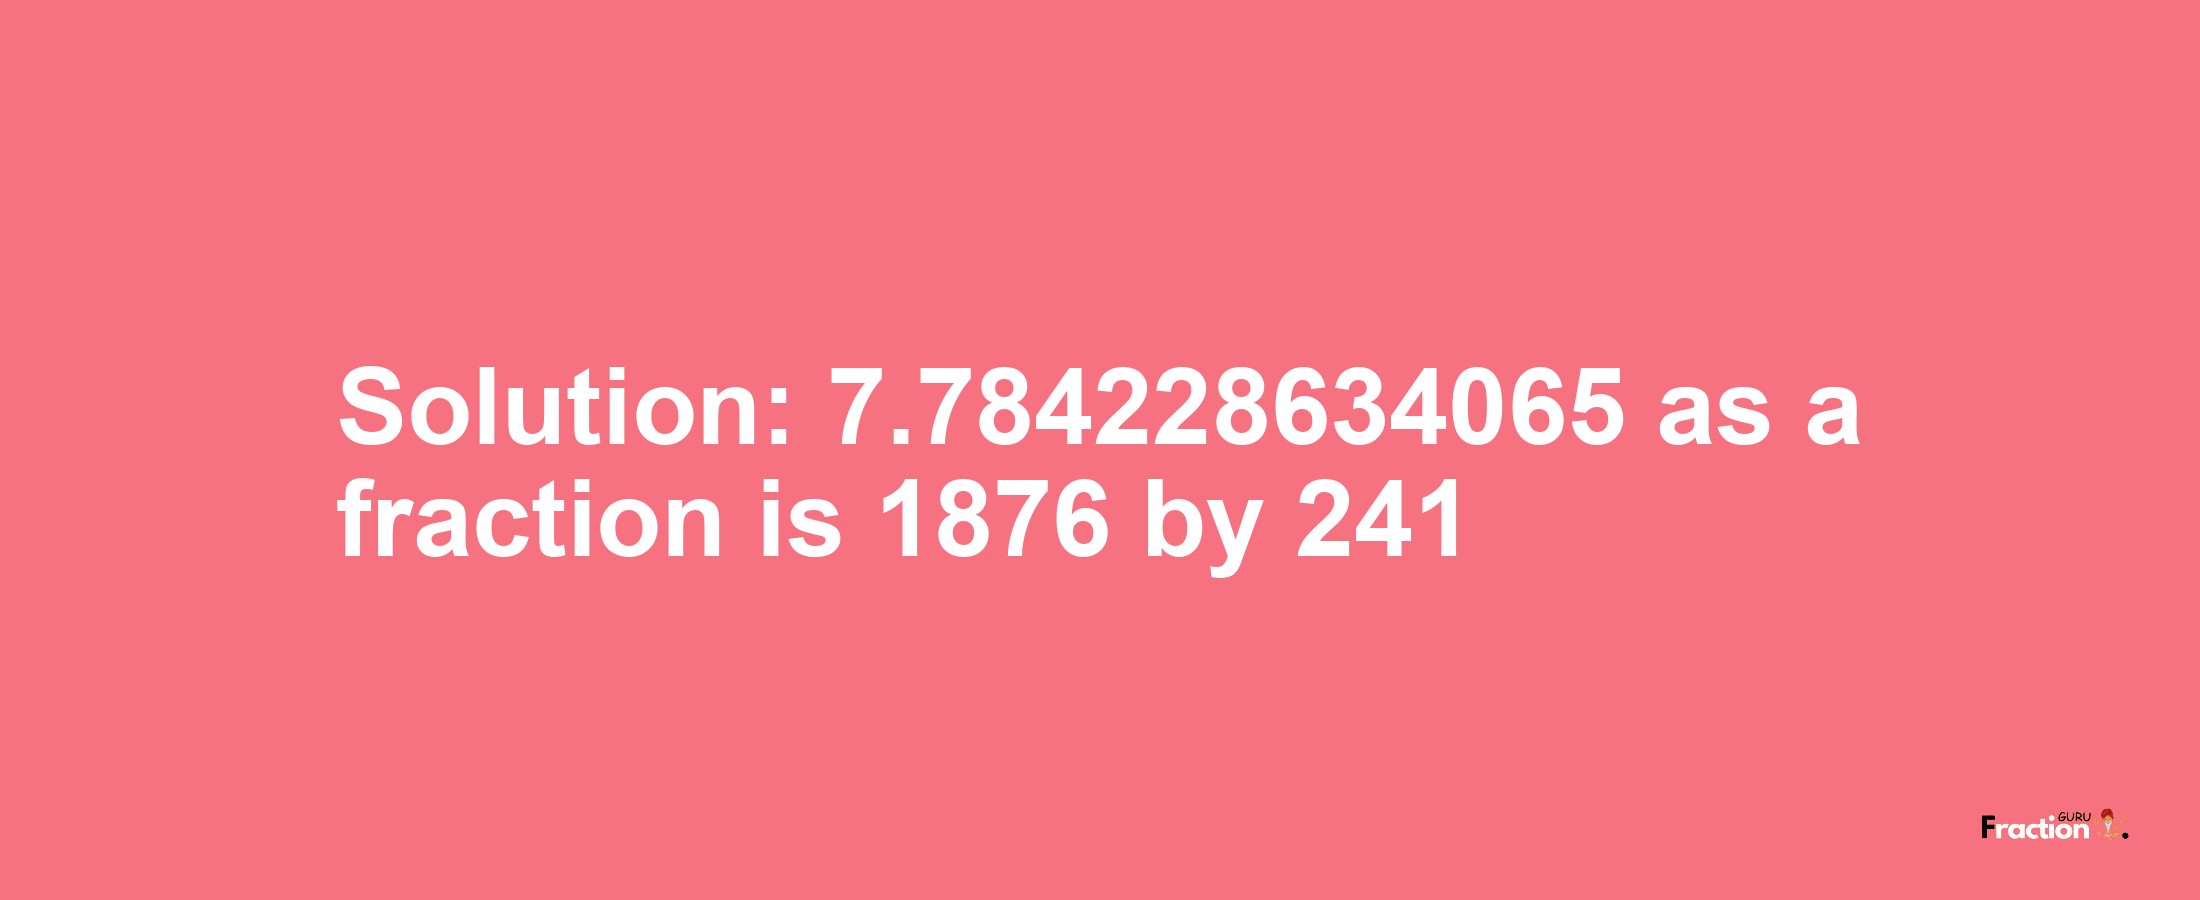 Solution:7.784228634065 as a fraction is 1876/241